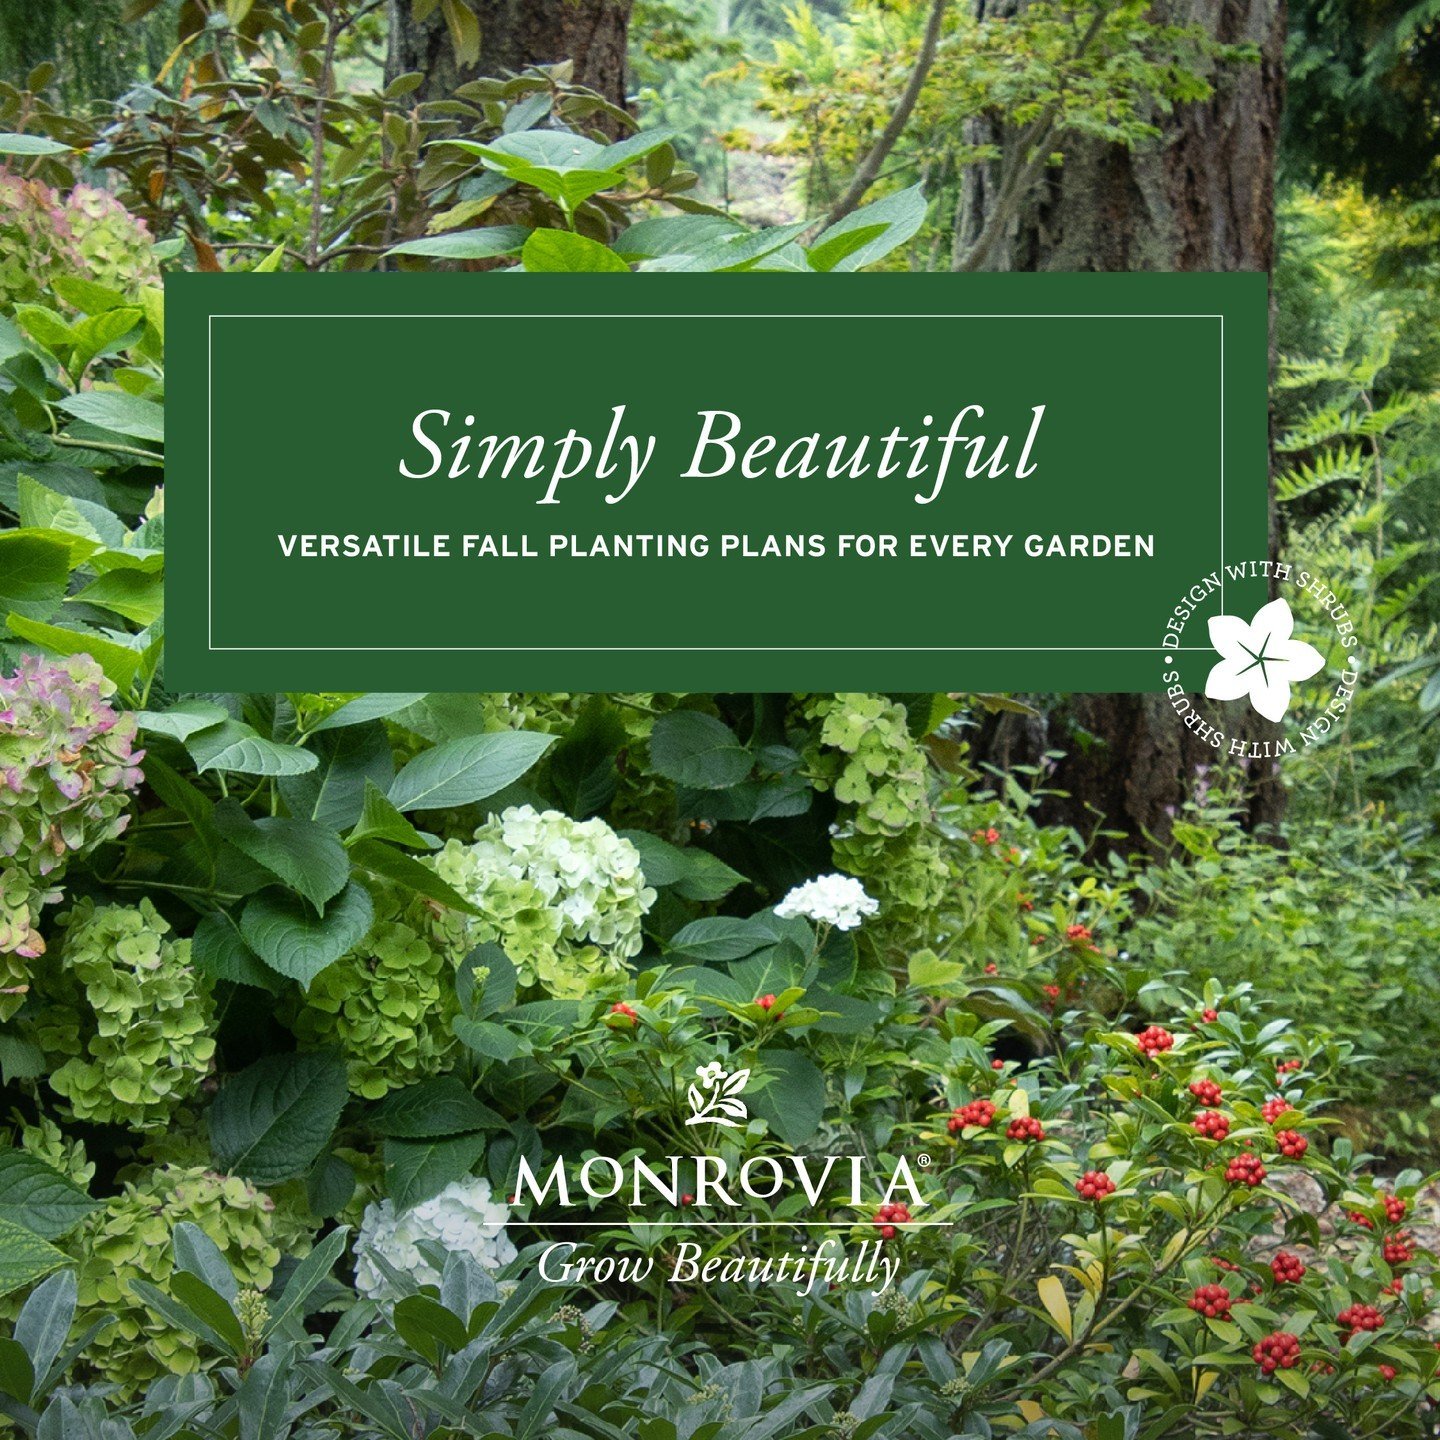 Simply Beautiful! The name of this gorgeous (and free!) #gardendesign guide from @MonroviaPlants says it all. You can get it at Monrovia.com. 

Psst: The #gardenplans and lessons are versatile enough to be used in any space or season! Use this to jum